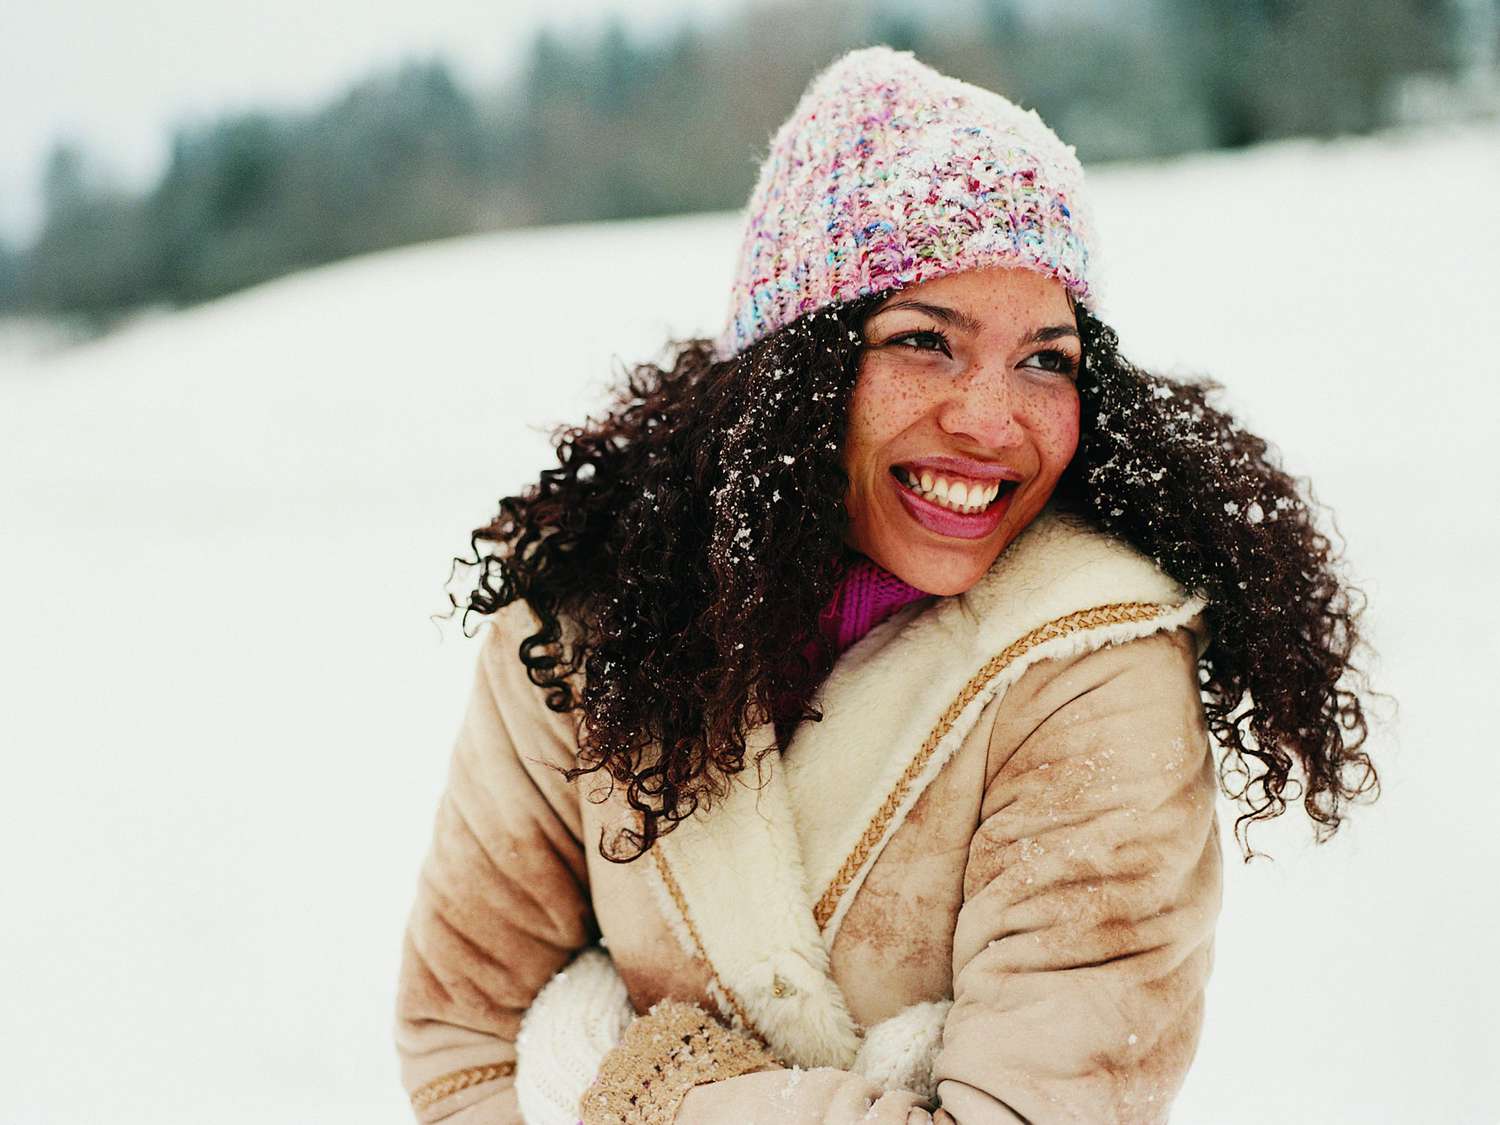 How To Dress Warmly This Winter: A Guide For Women